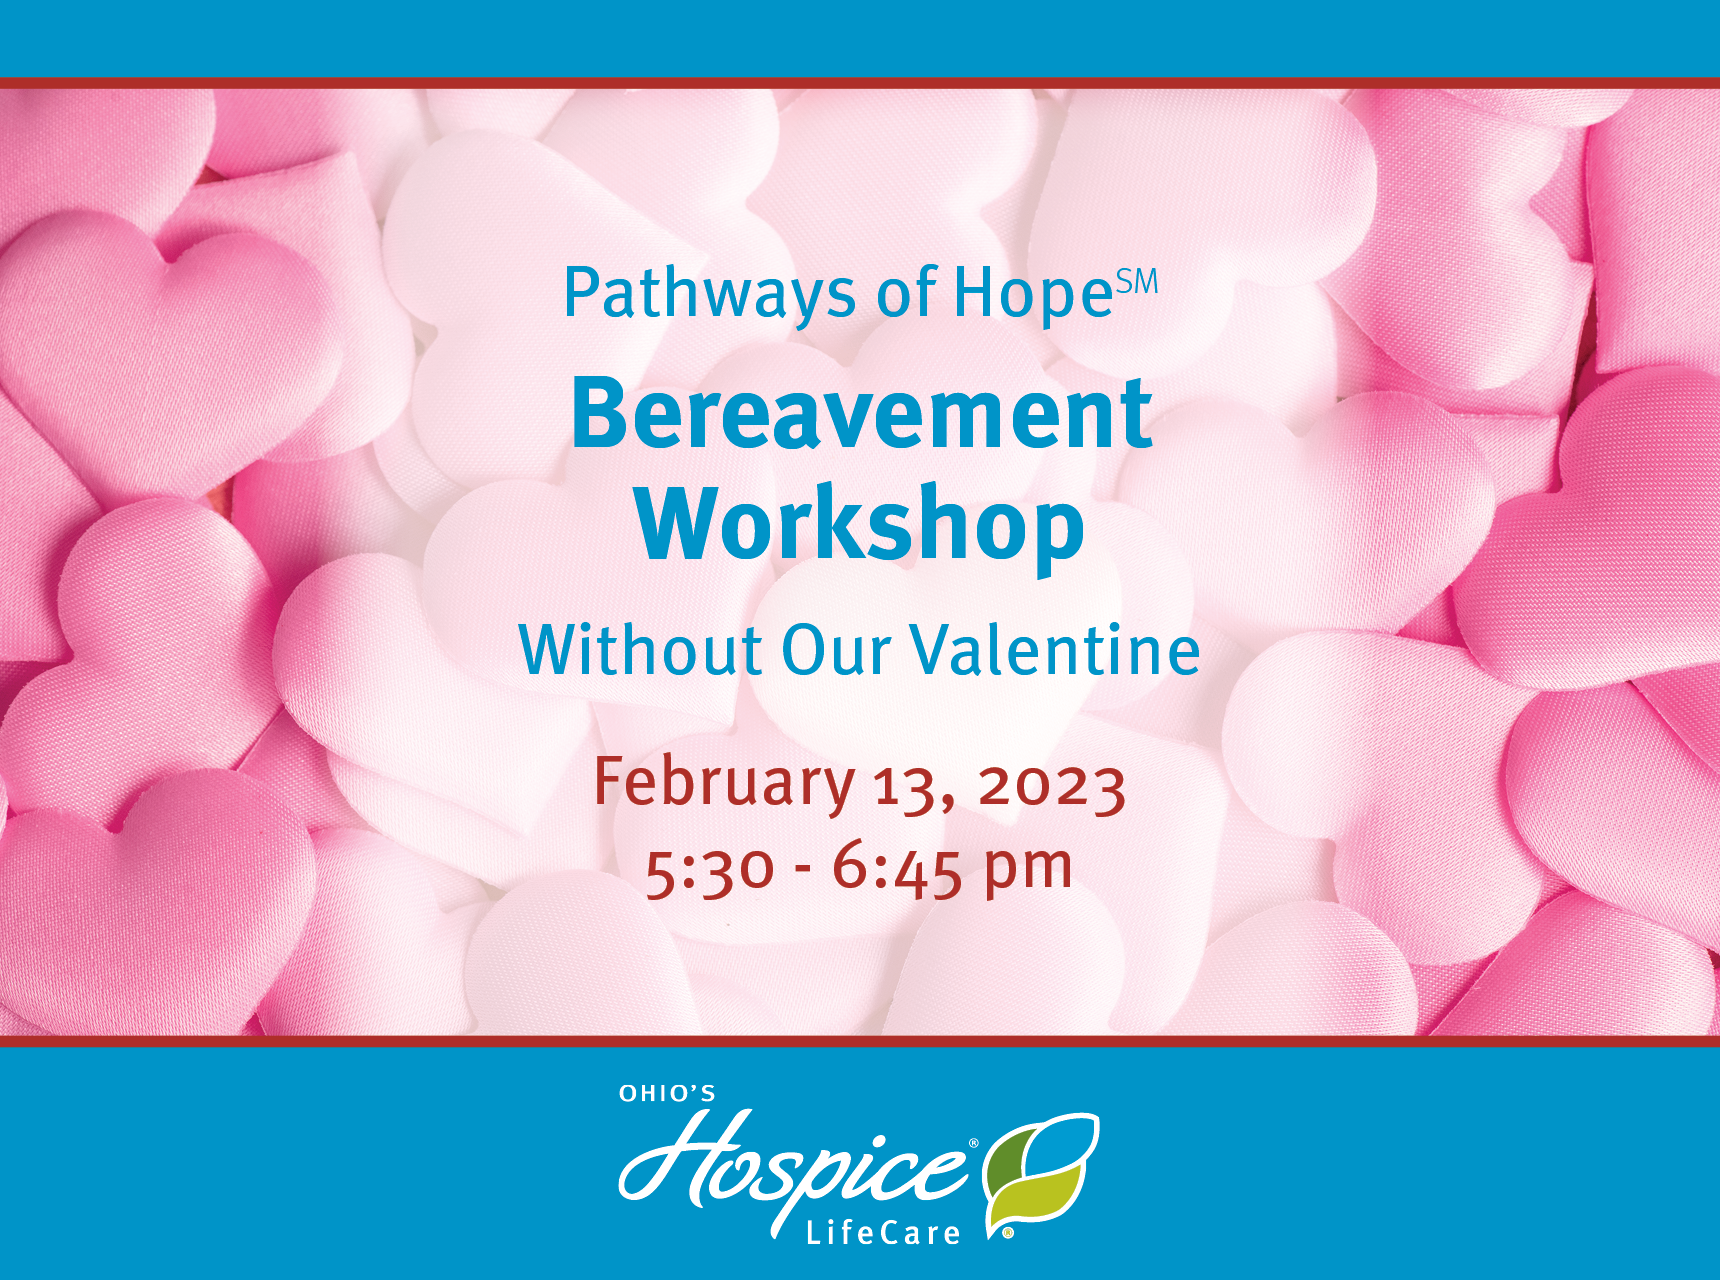 Pathways of Hope Bereavement Workshop: Without Our Valentine. February 13, 2023. 5:30 - 6:45 pm. Ohio's Hospice LifeCare